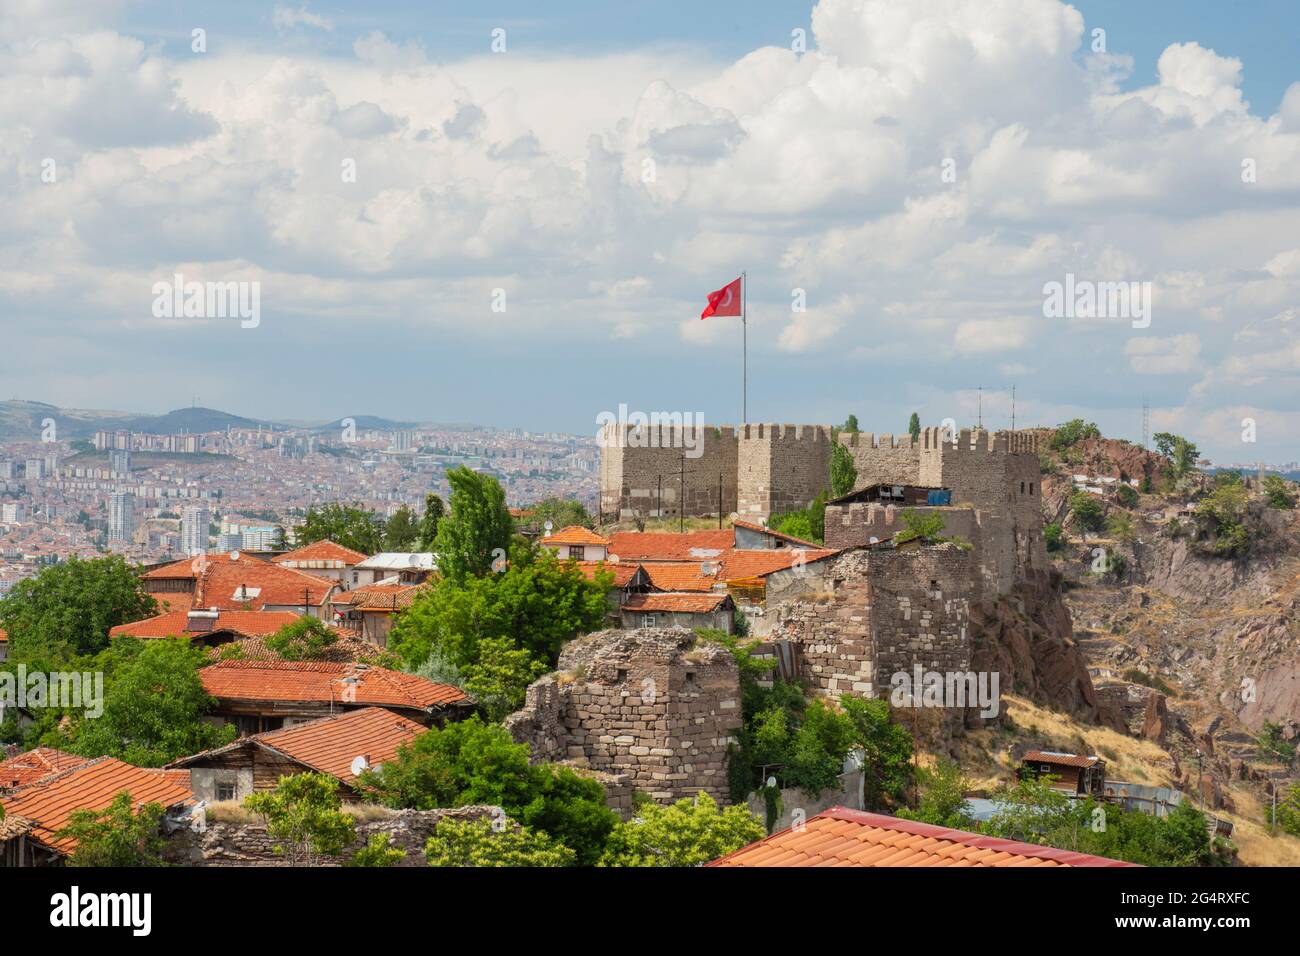 Panoramic of Ankara castle and Turkish flag in Post under cloudy blue sky Stock Photo